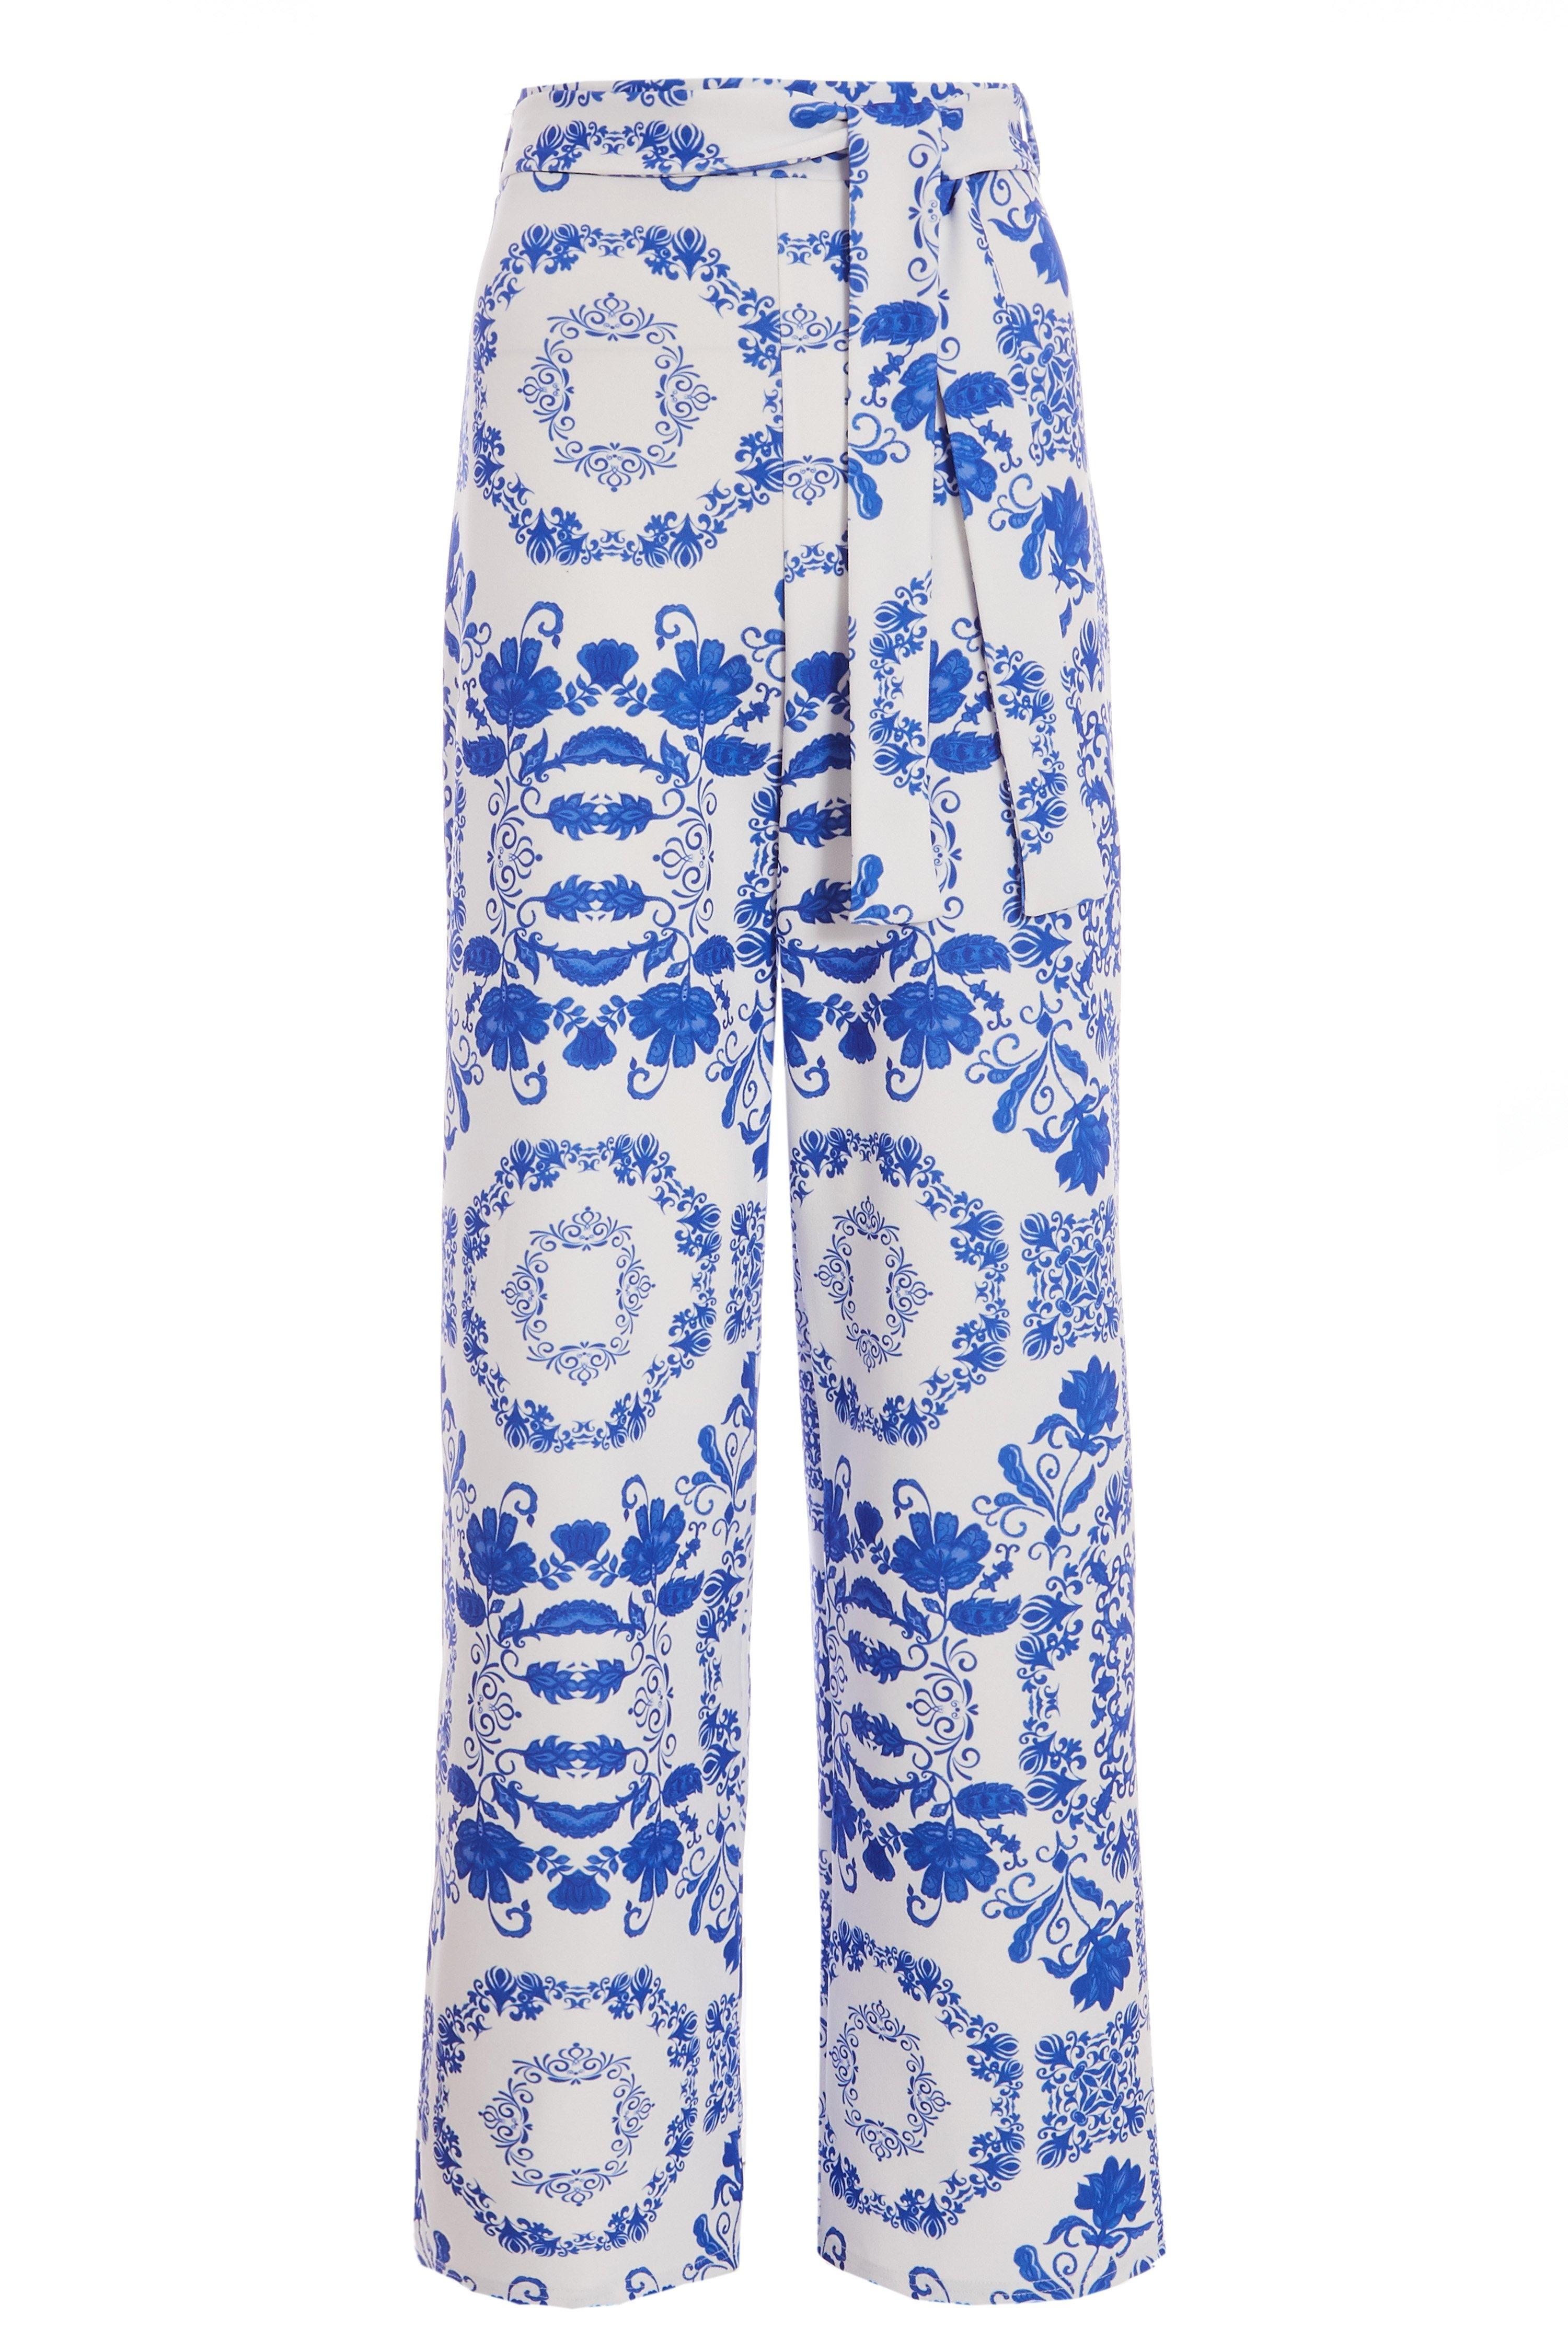 Royal Blue and White Tile Print Palazzo Trousers - Quiz Clothing